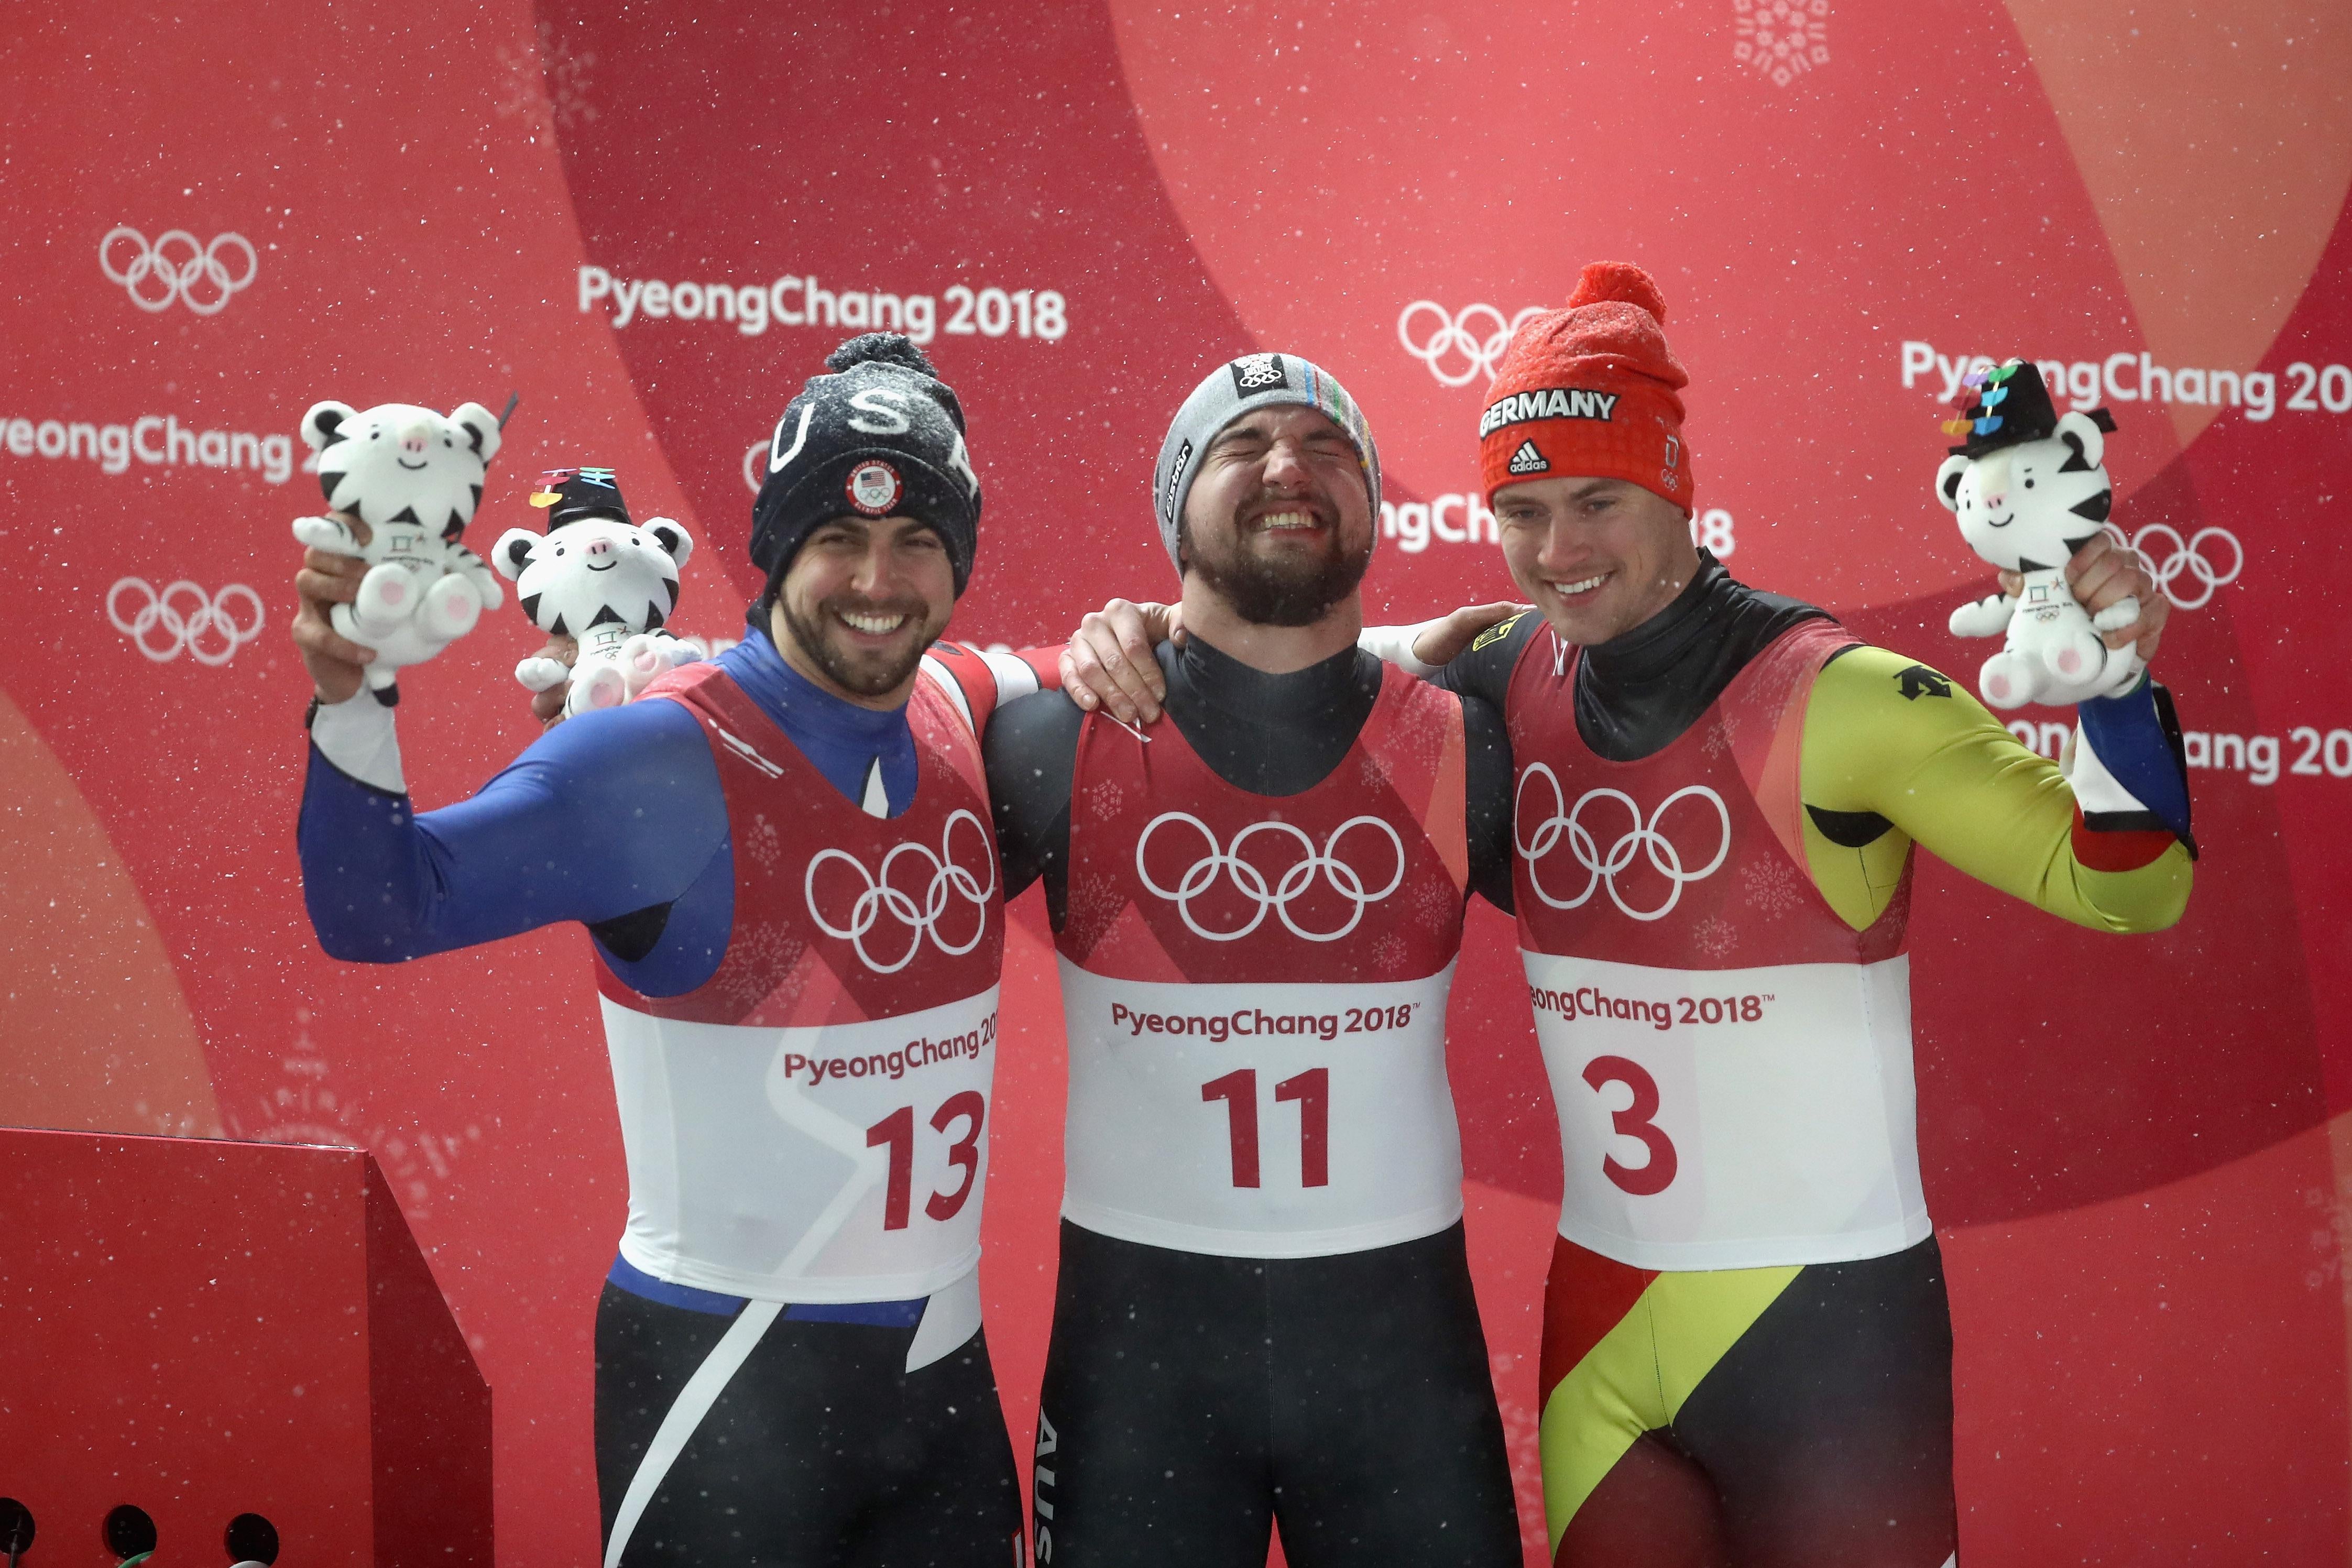 Chris Mazdzer (silver) of the United States, David Gleirscher (gold) of Austria, and Johannes Ludwig (bronze) of Germany celebrate at the flower ceremony.